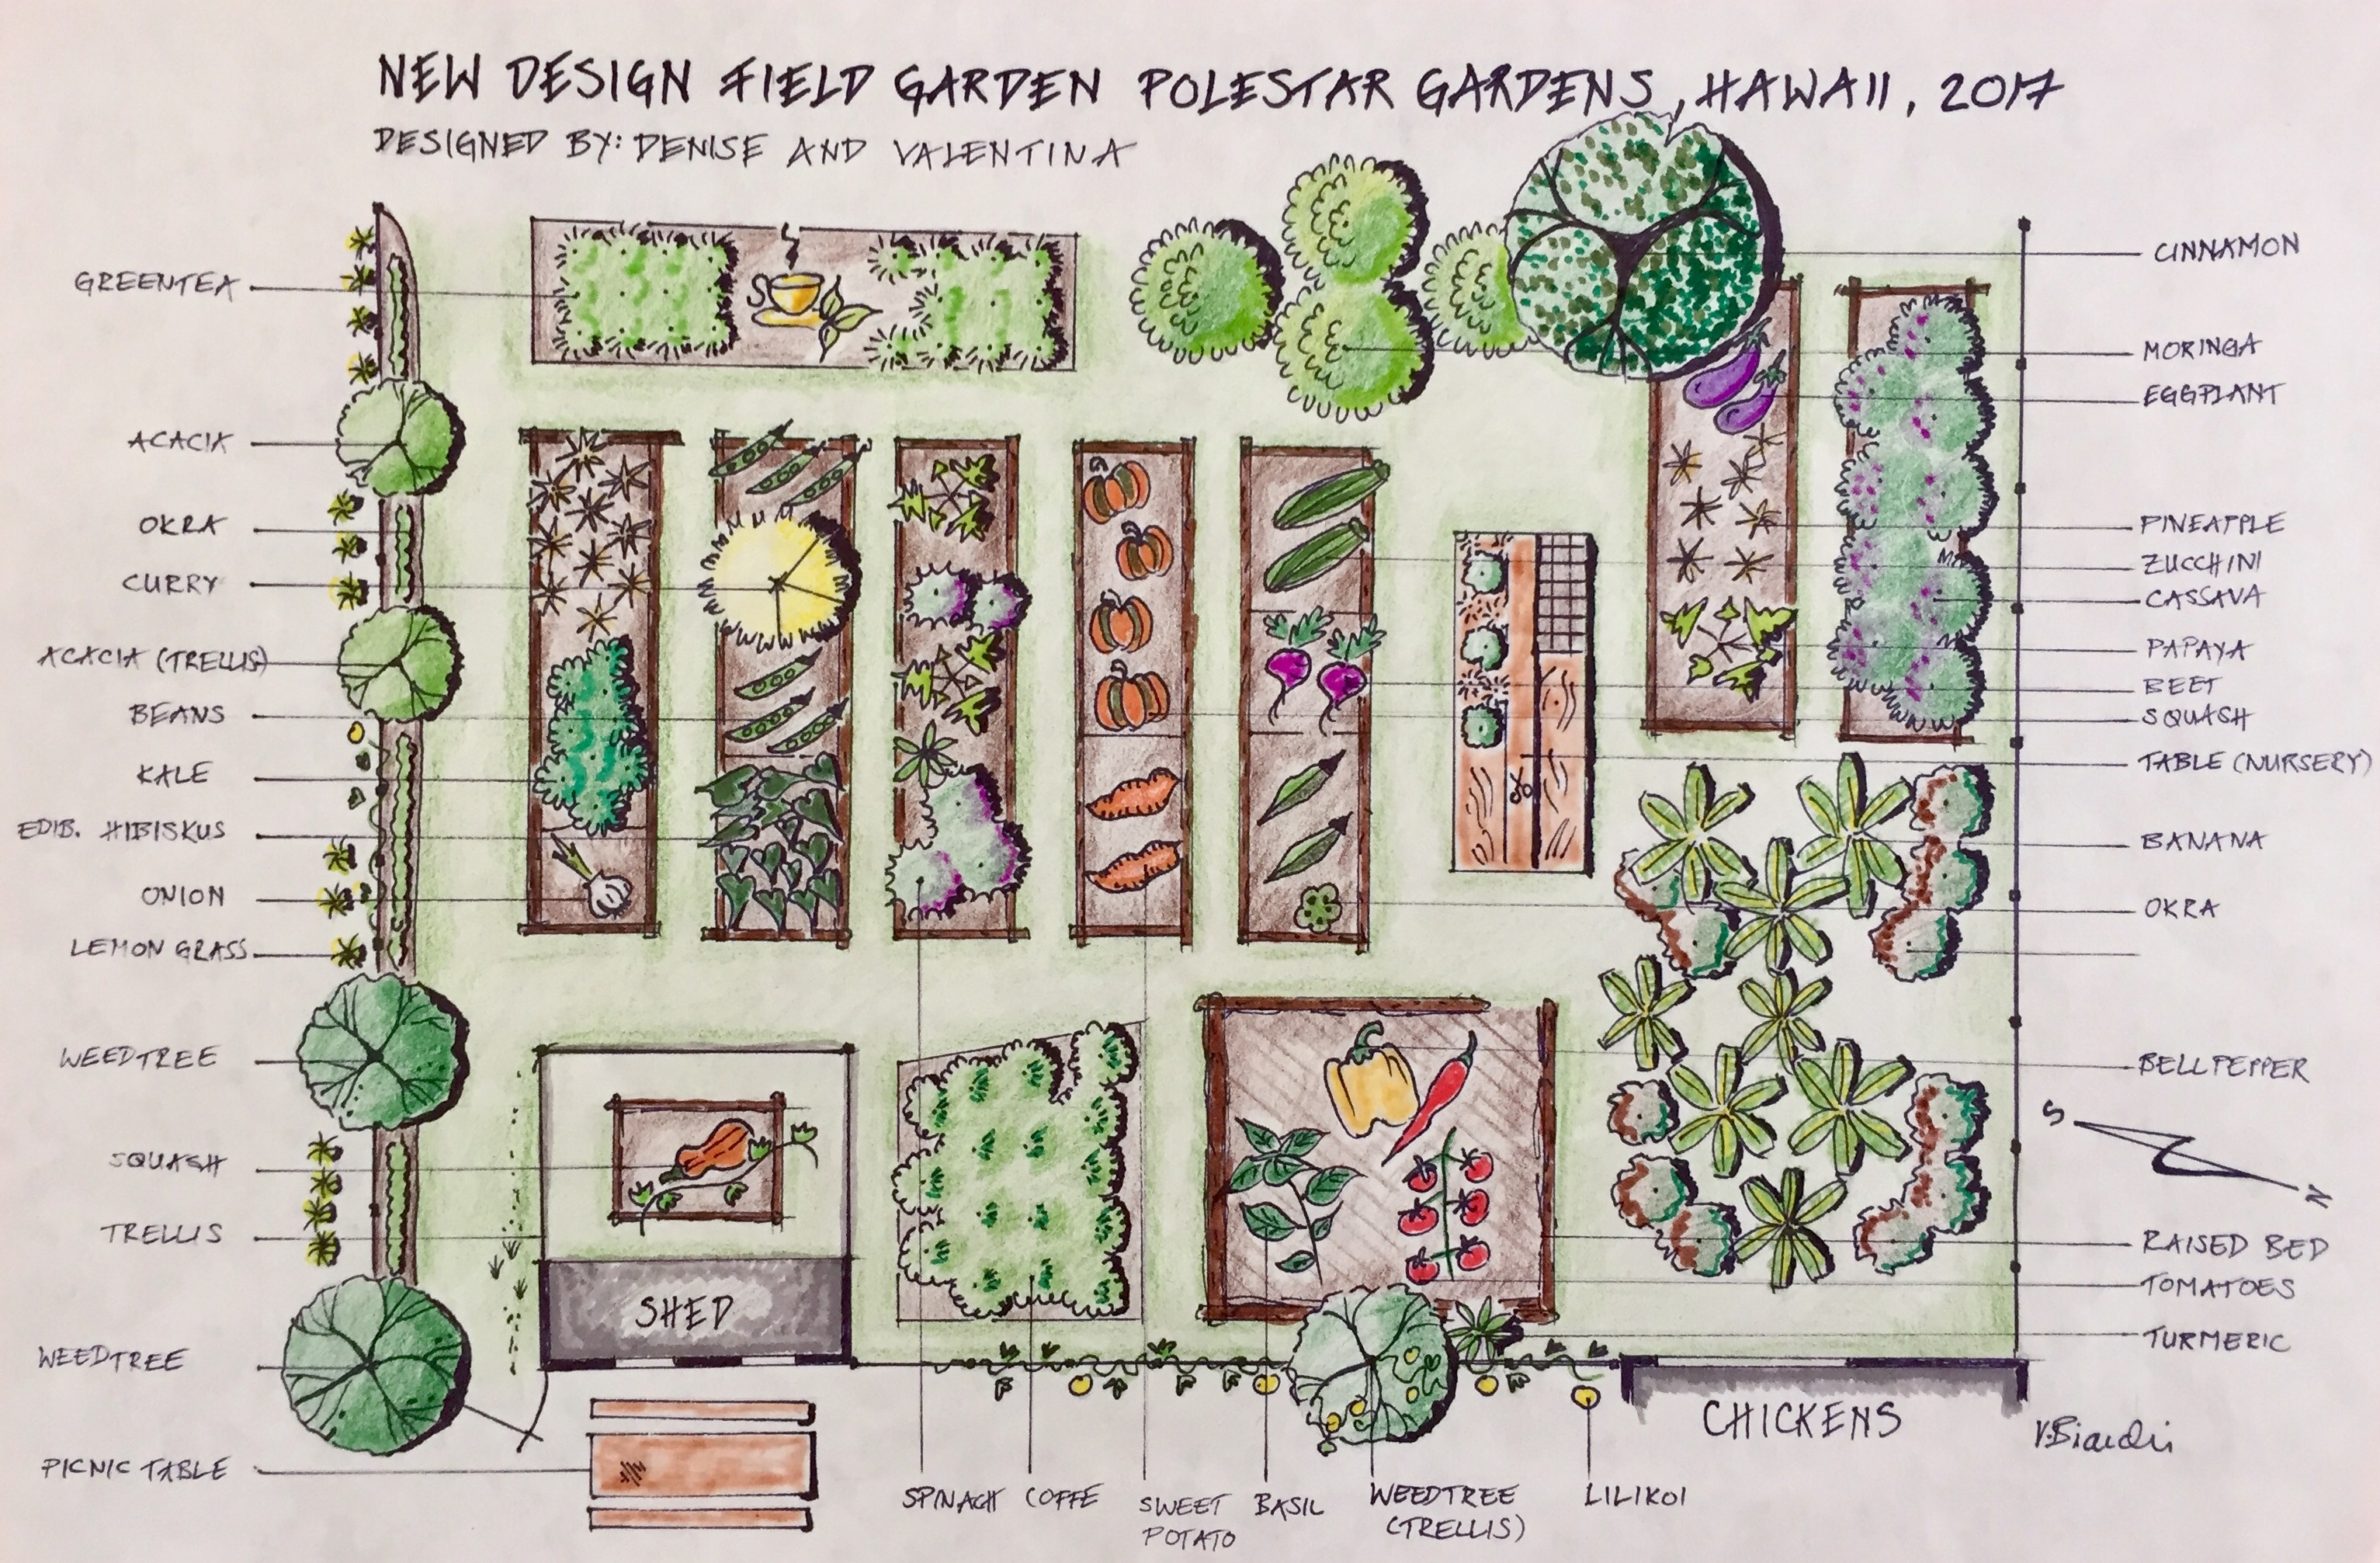 Permaculture And Agroforestry In Hawaii At Polestar Gardens